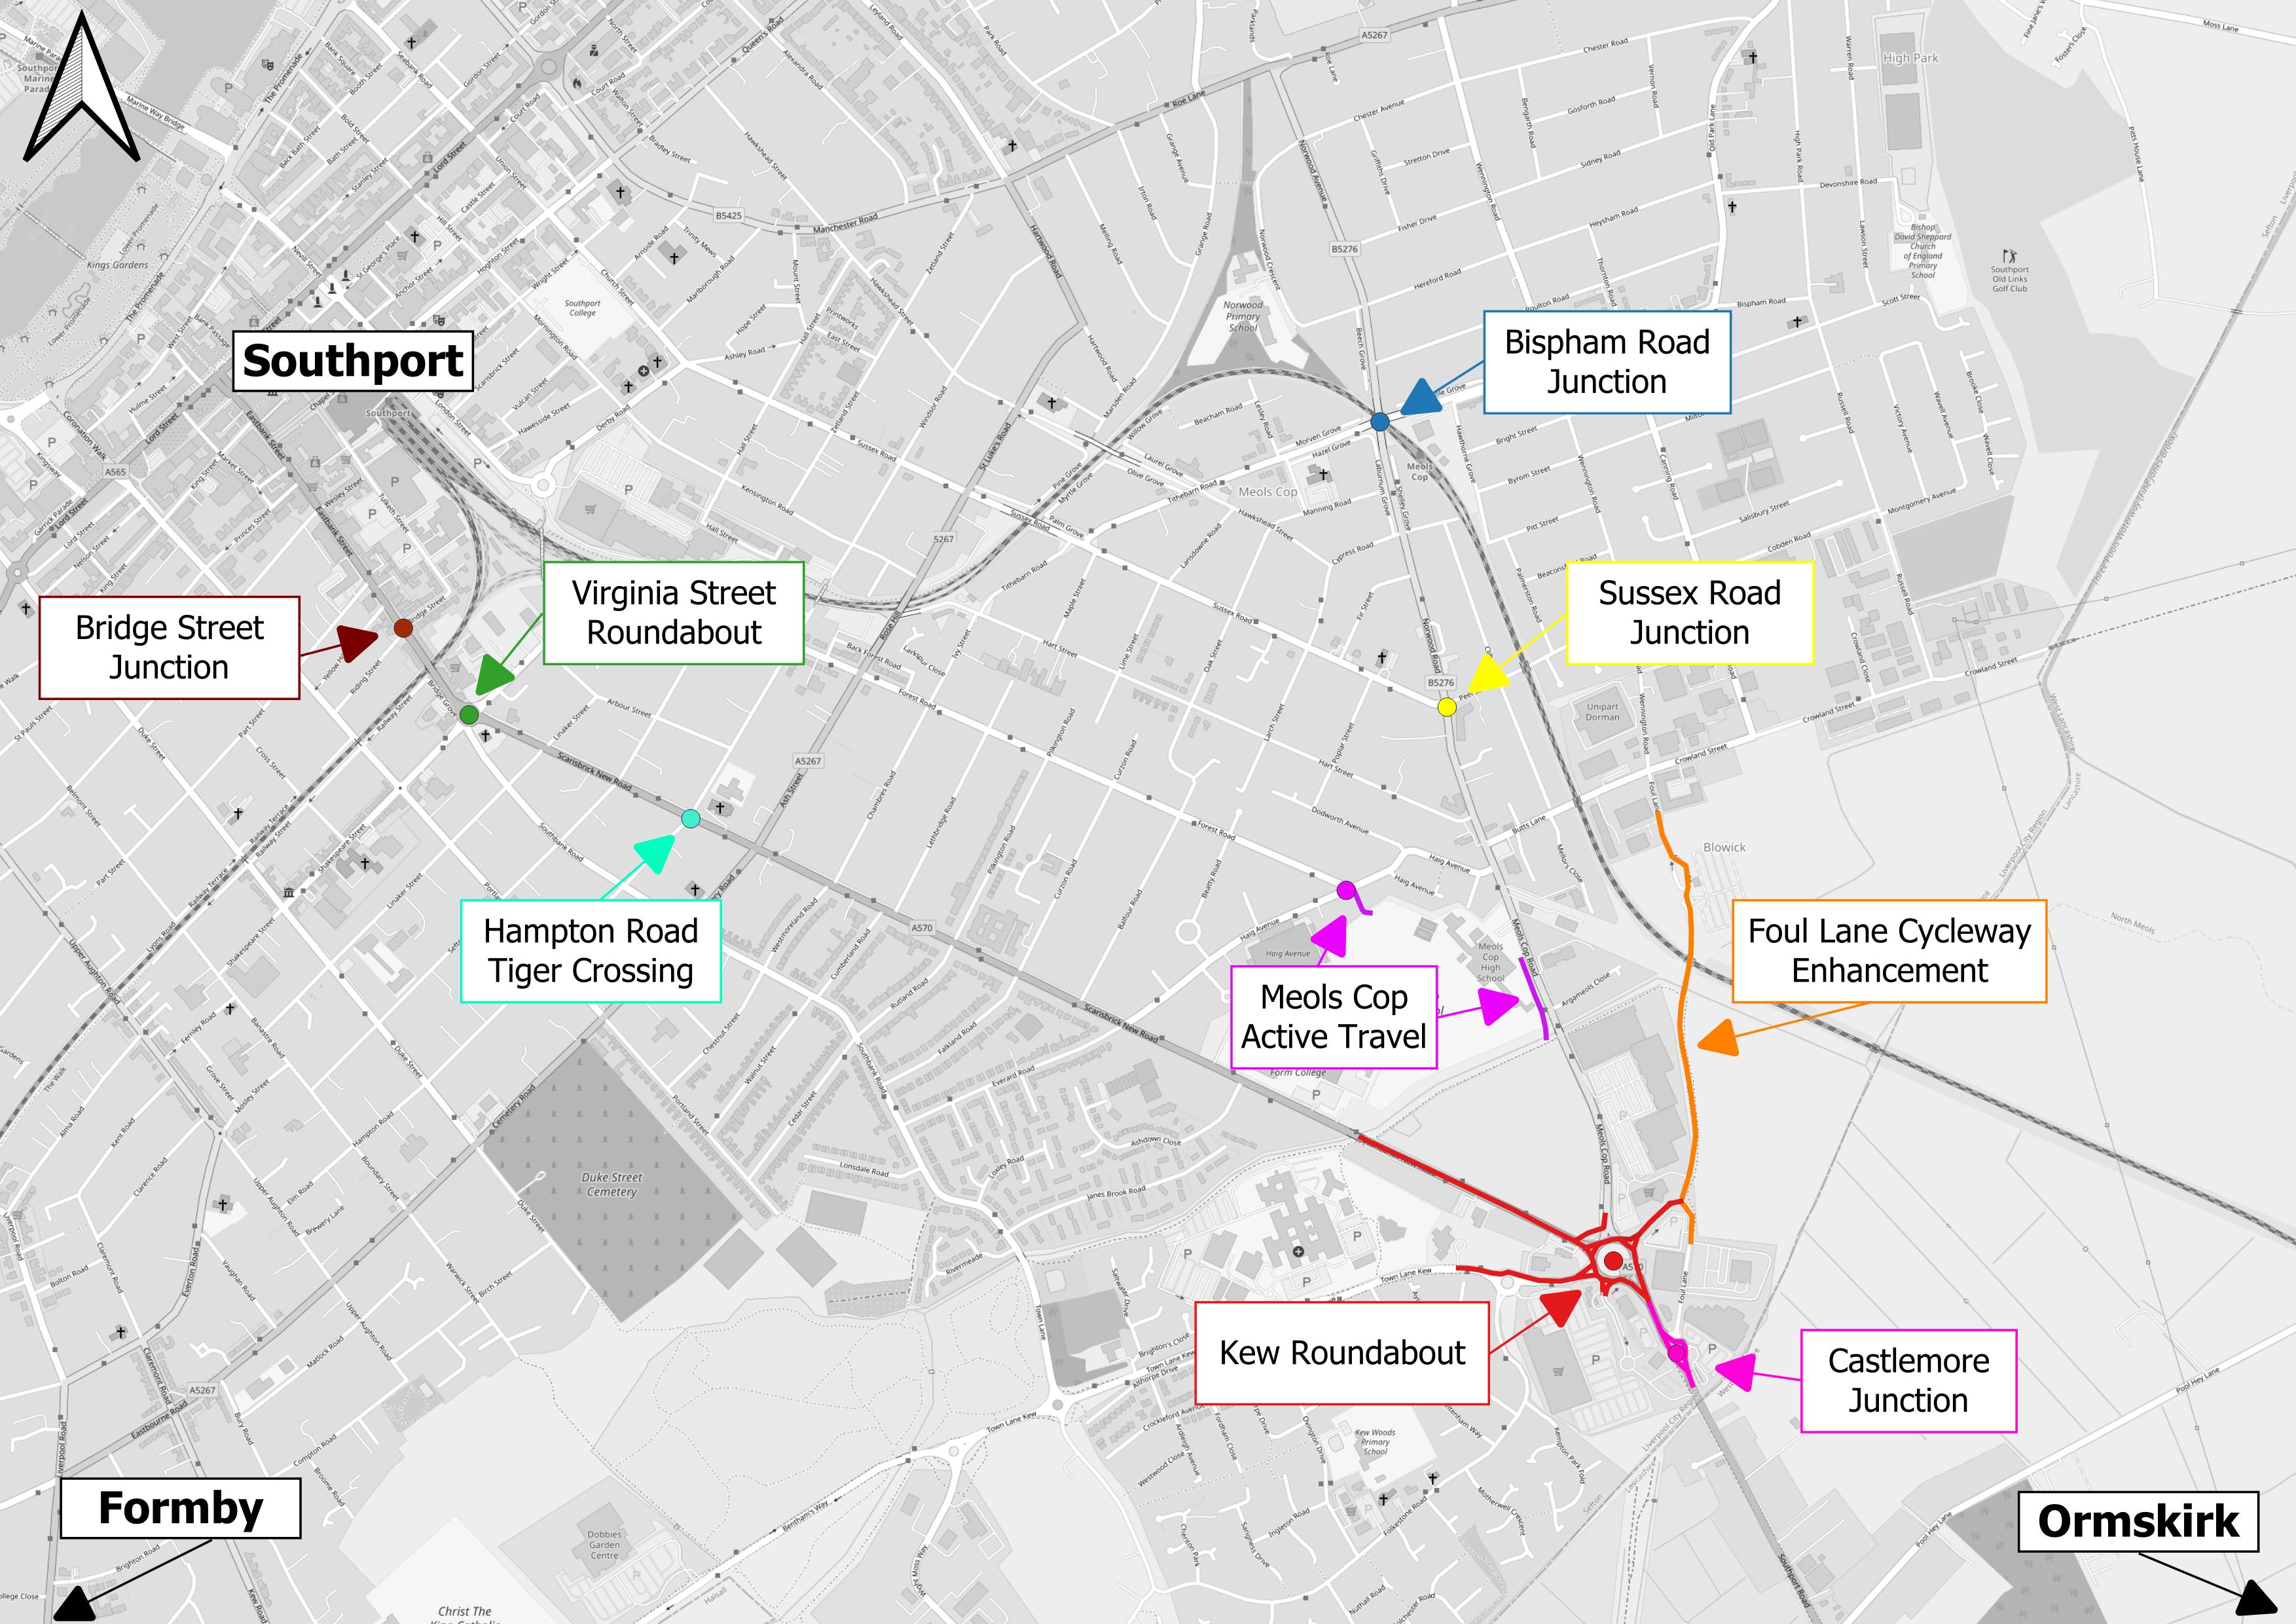 This map shows the location of the Southport Eastern Access Scheme. It shows the improvements proposed including (from west to east) Bridge Street Junction, Virginia Street Roundabout, Hampton Road Tiger Crossing, Bispham Road Junction, Sussex Road Junction, Meols Cop Active Travel, Kew Roundabout, Castlemore Junction and Foul Lane Enhanced Cycleway.